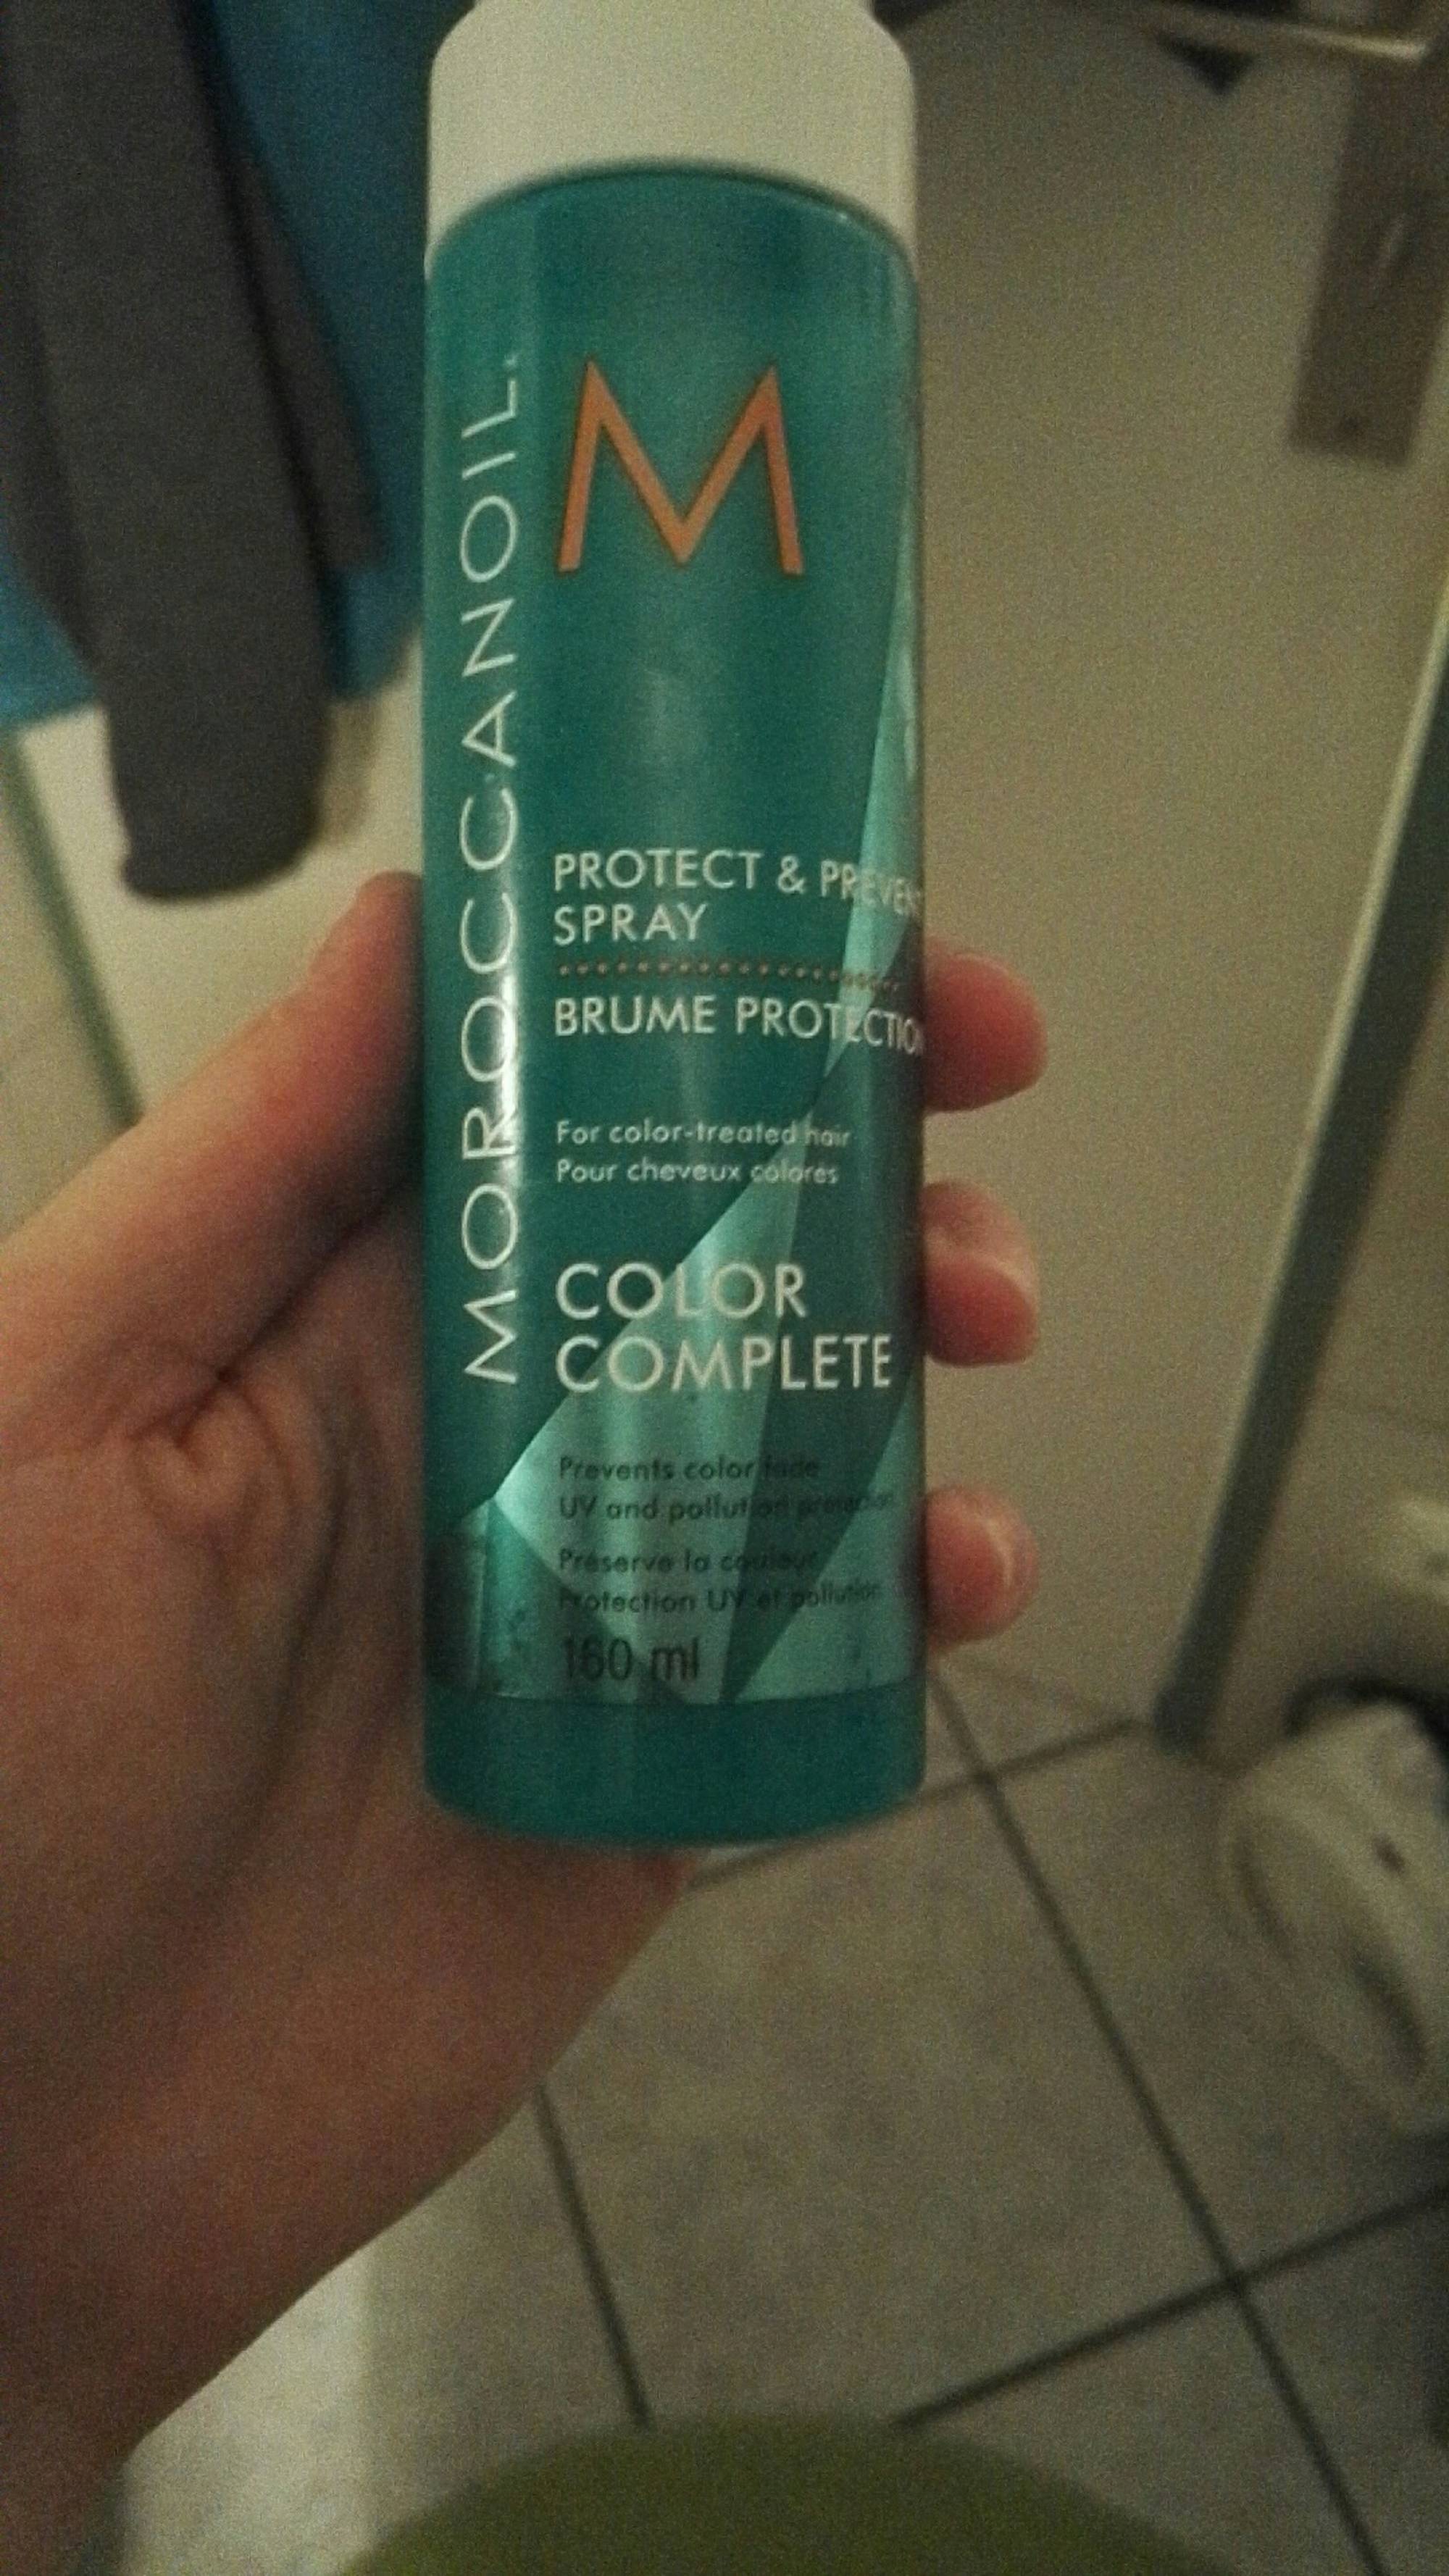 MOROCCANOIL - Color complete - Brume protection